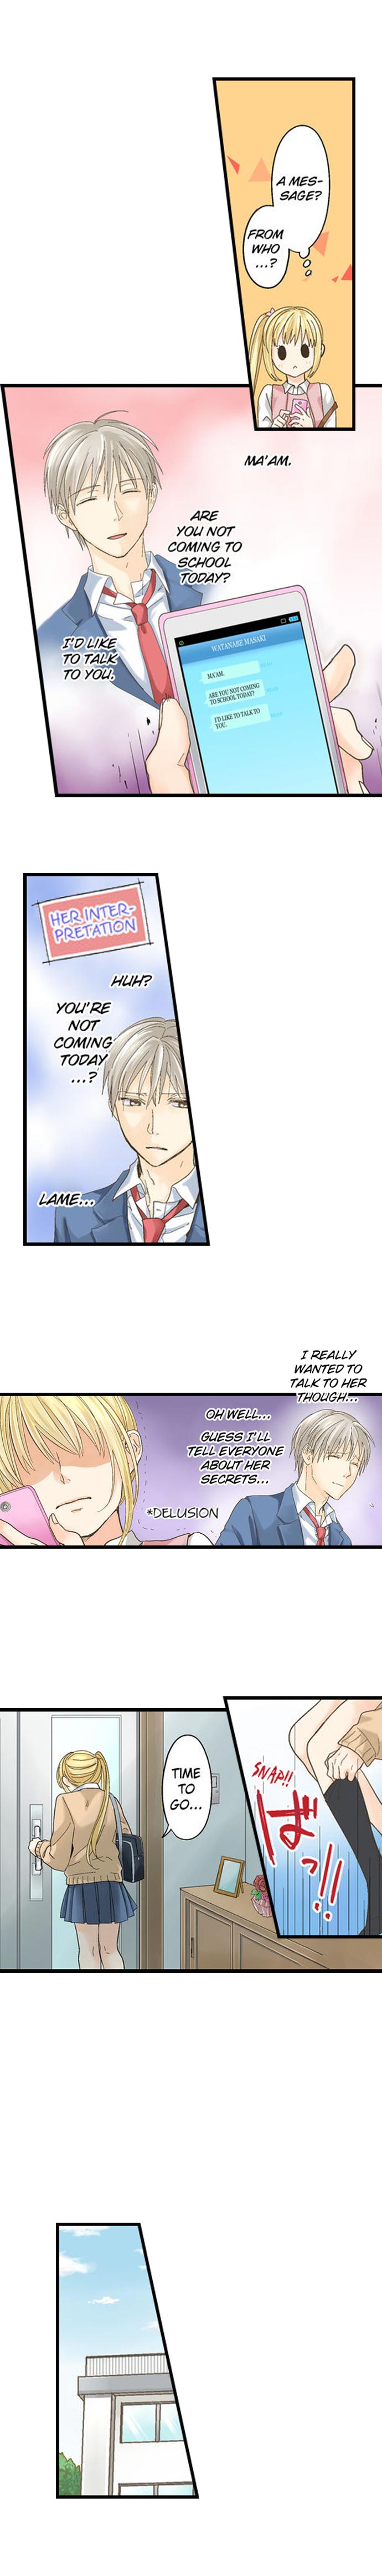 Running a Love Hotel with My Math Teacher - Chapter 39 Page 4